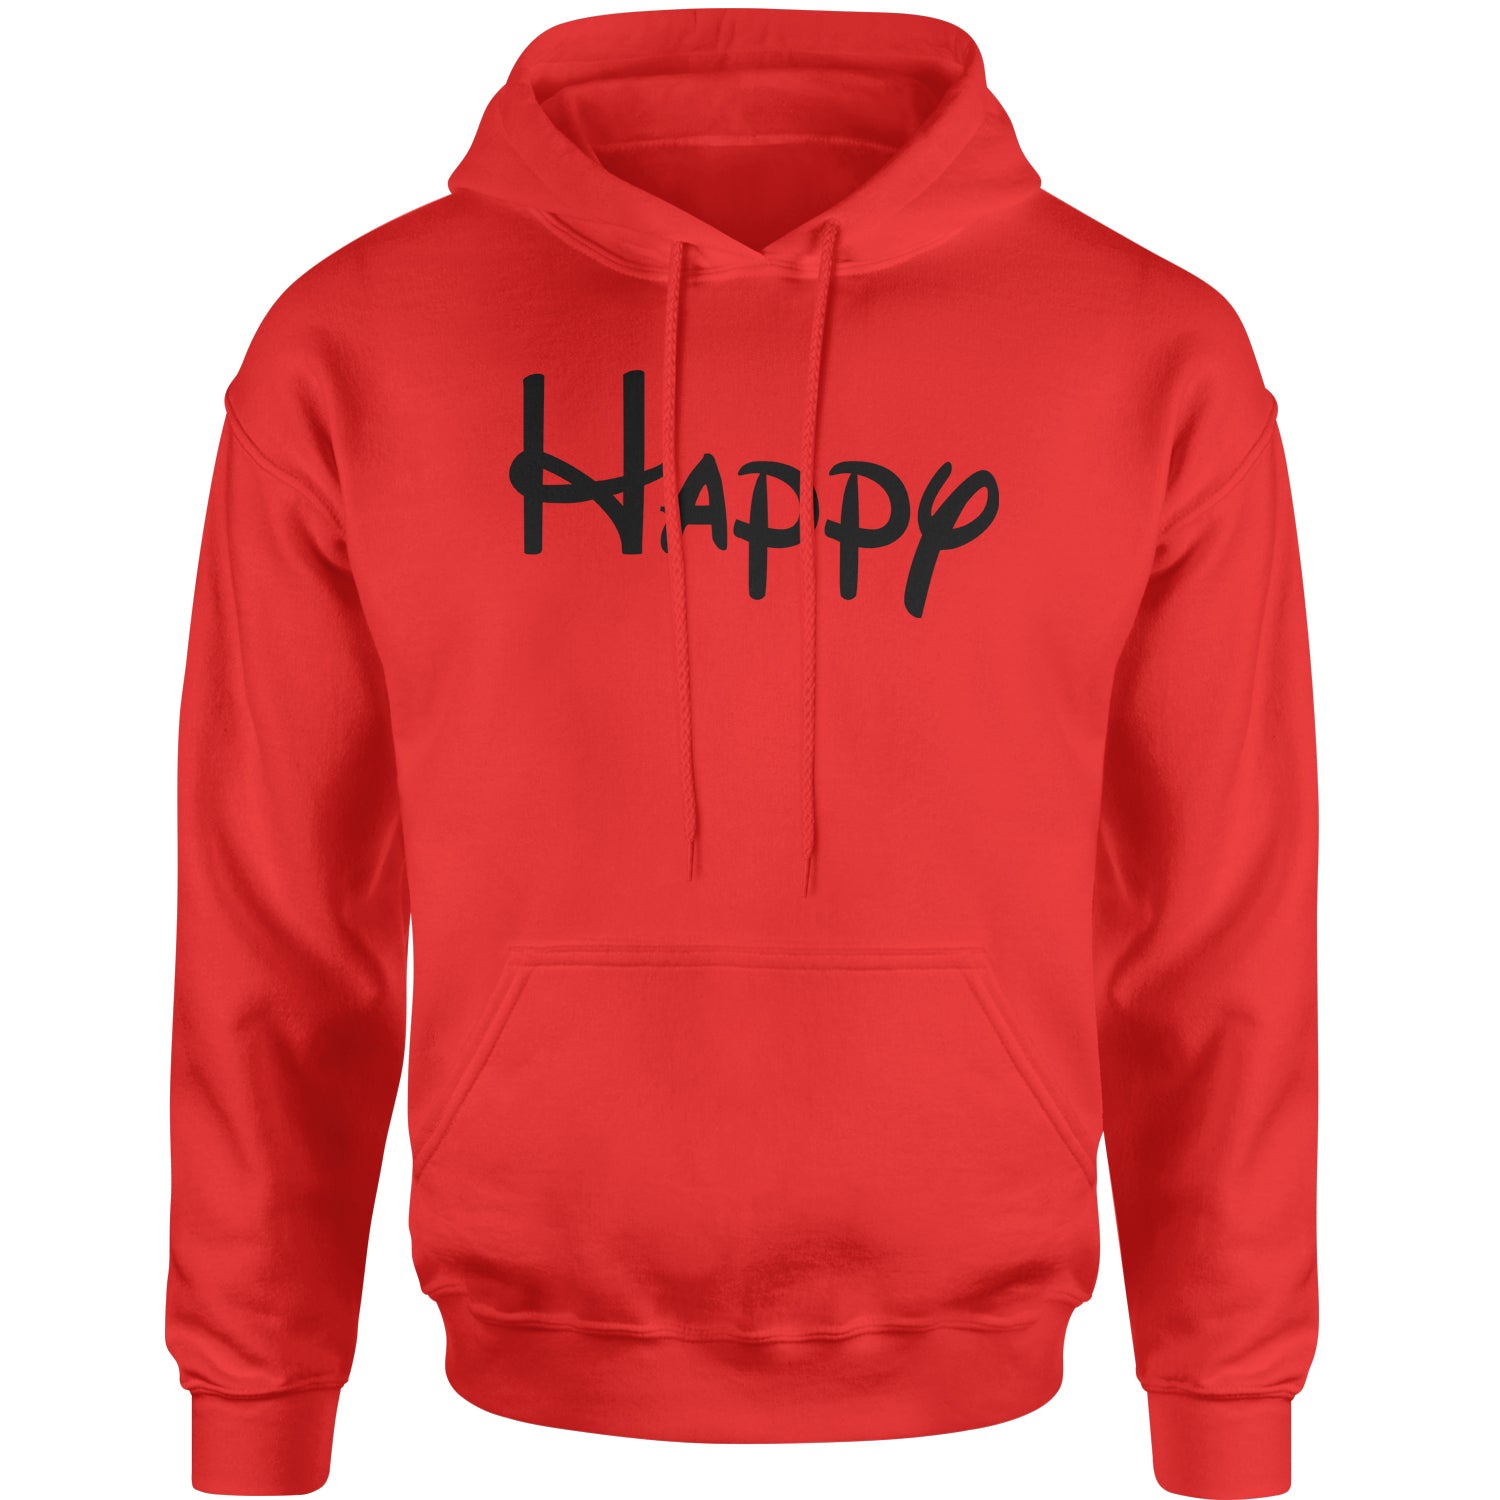 Happy - 7 Dwarfs Costume Adult Hoodie Sweatshirt and, costume, dwarfs, group, halloween, matching, seven, snow, the, white by Expression Tees